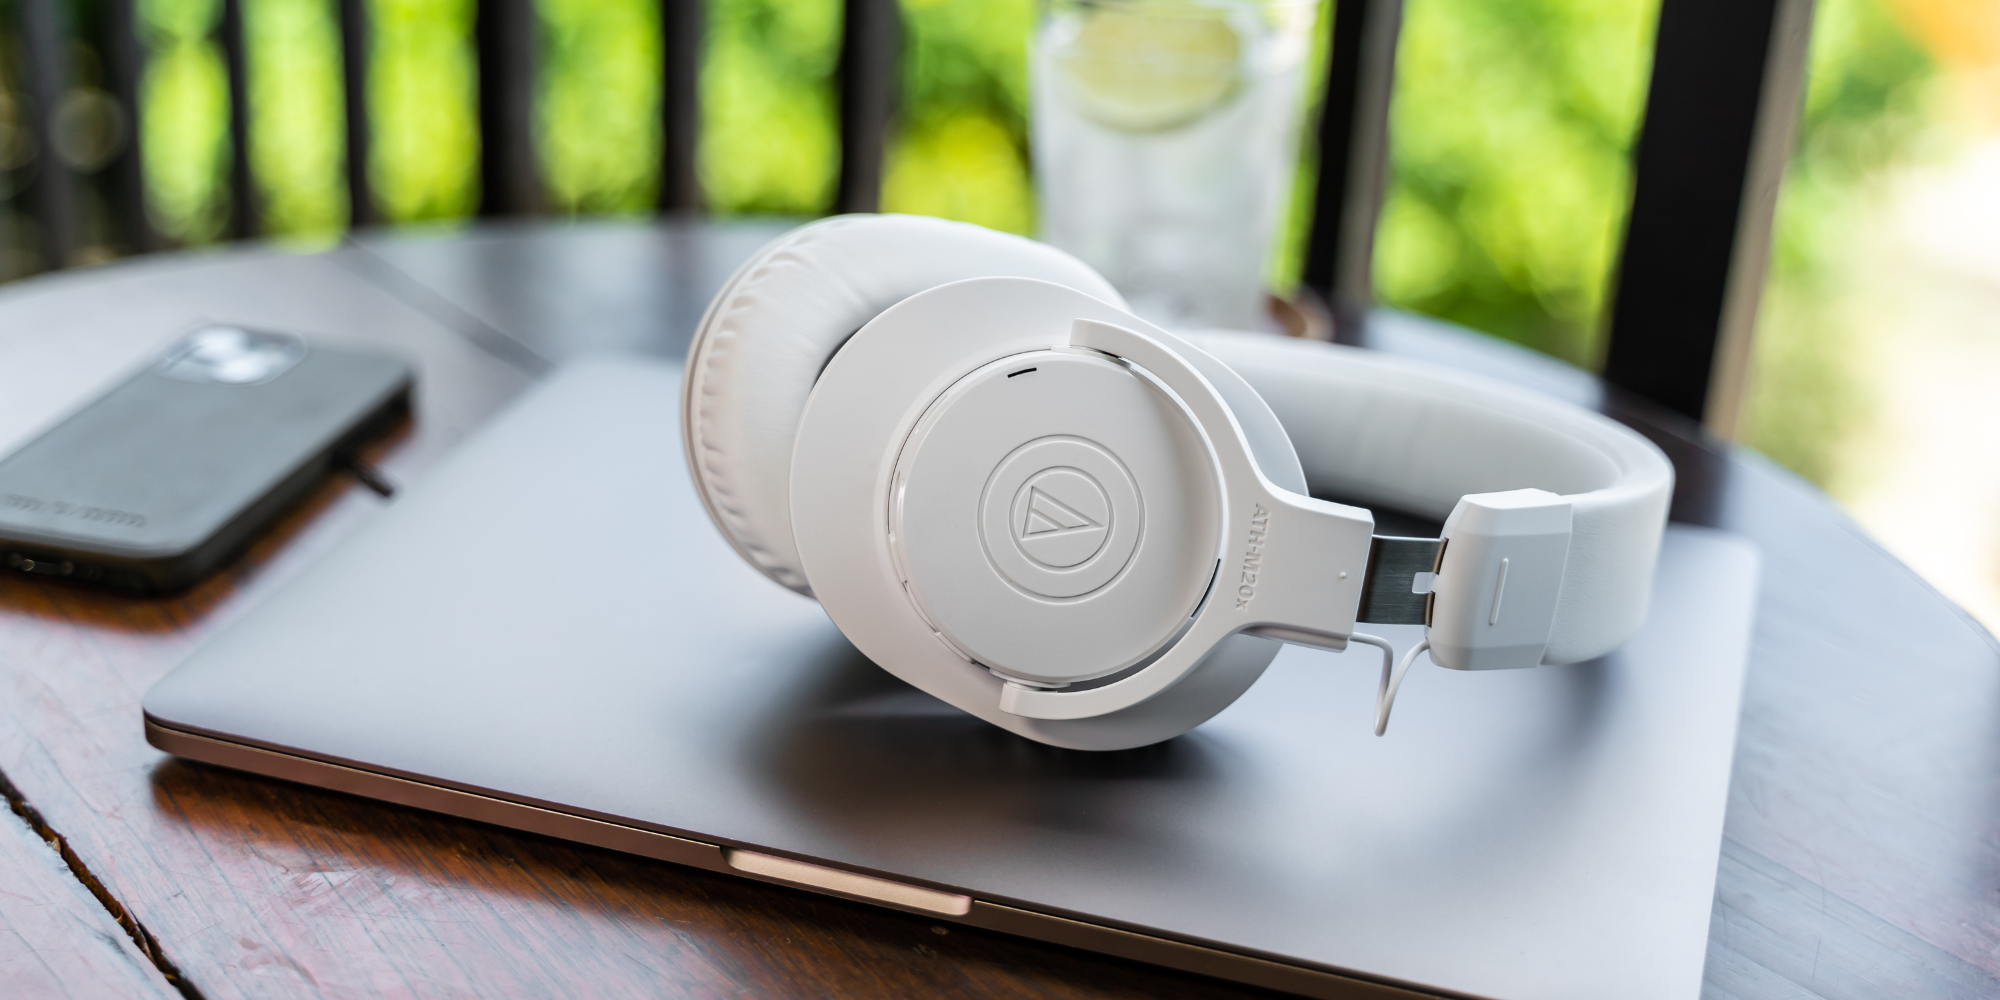 Get the Most Out of Your ATH-M20xBT Wireless Over-Ear Headphones